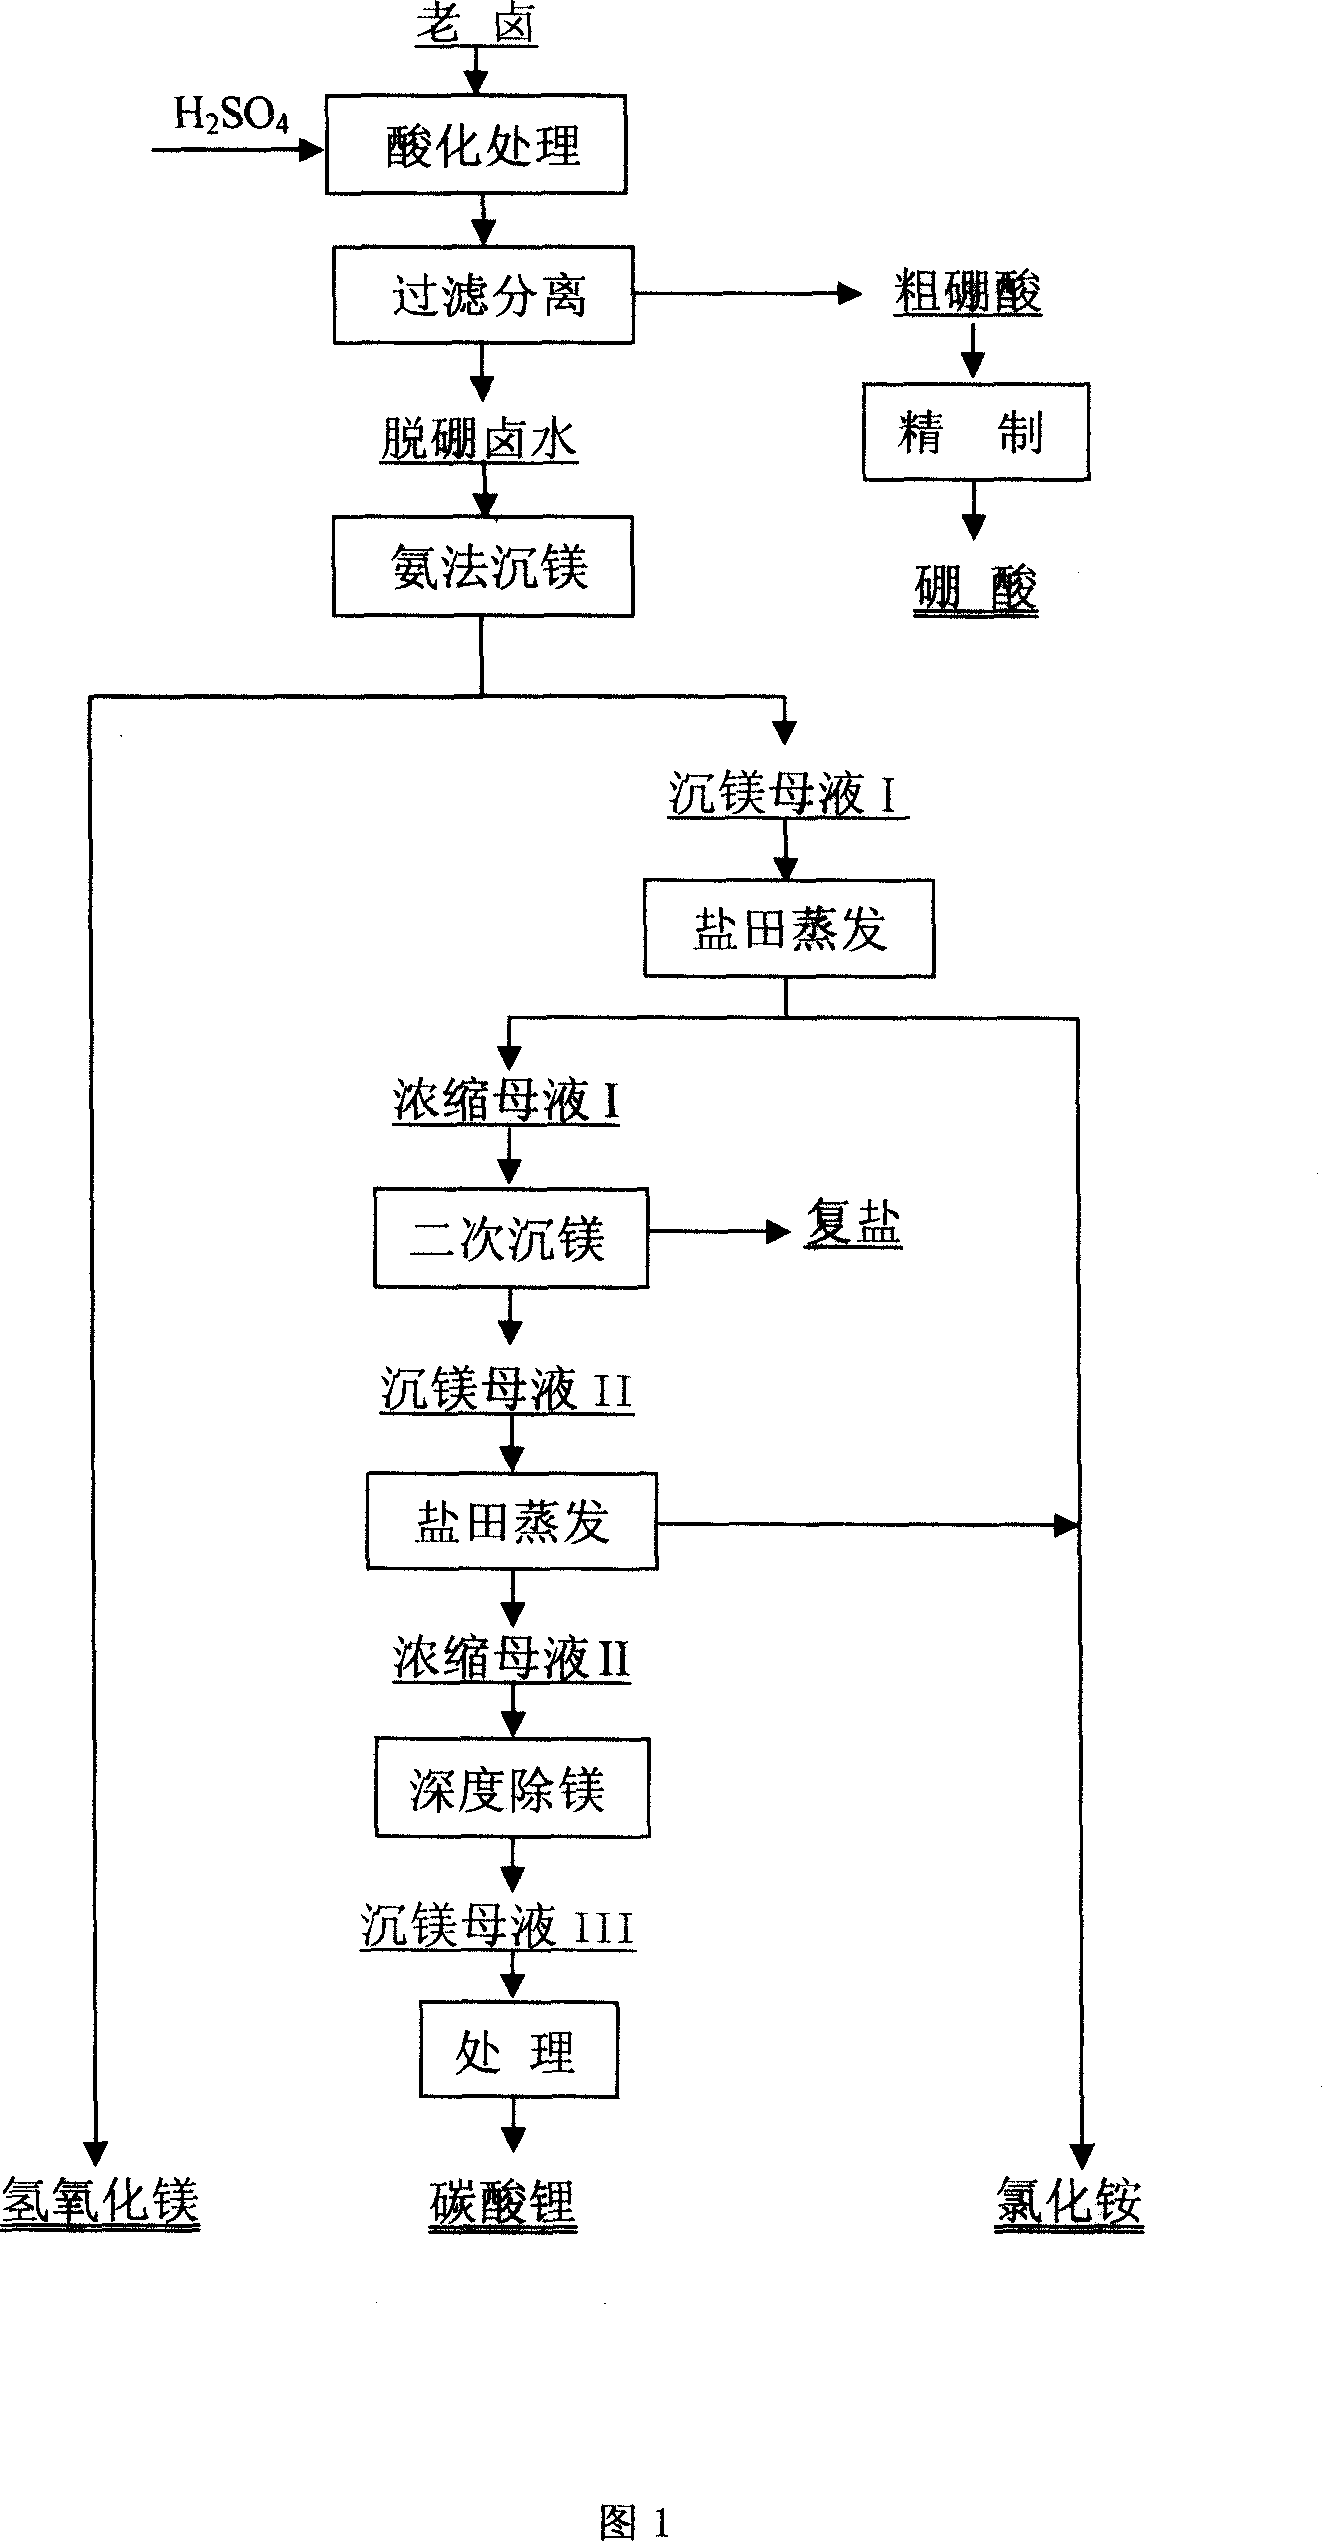 Method for combined extracting boron, magnesium and lithium from salt lake bittern